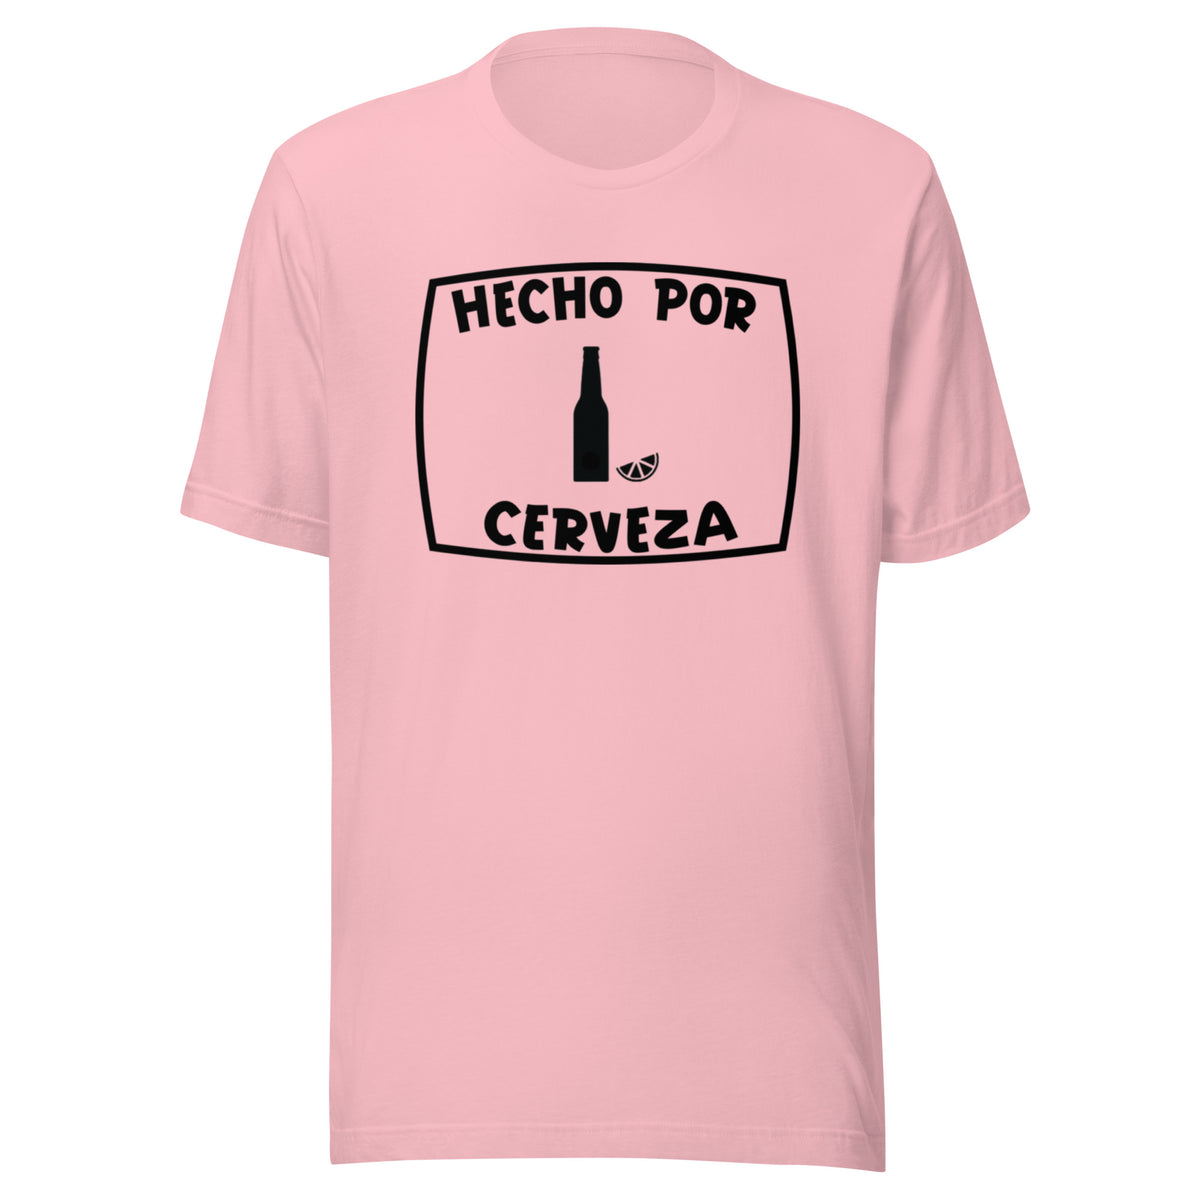 Hecho por Cerveza T-shirt (Made by beer)